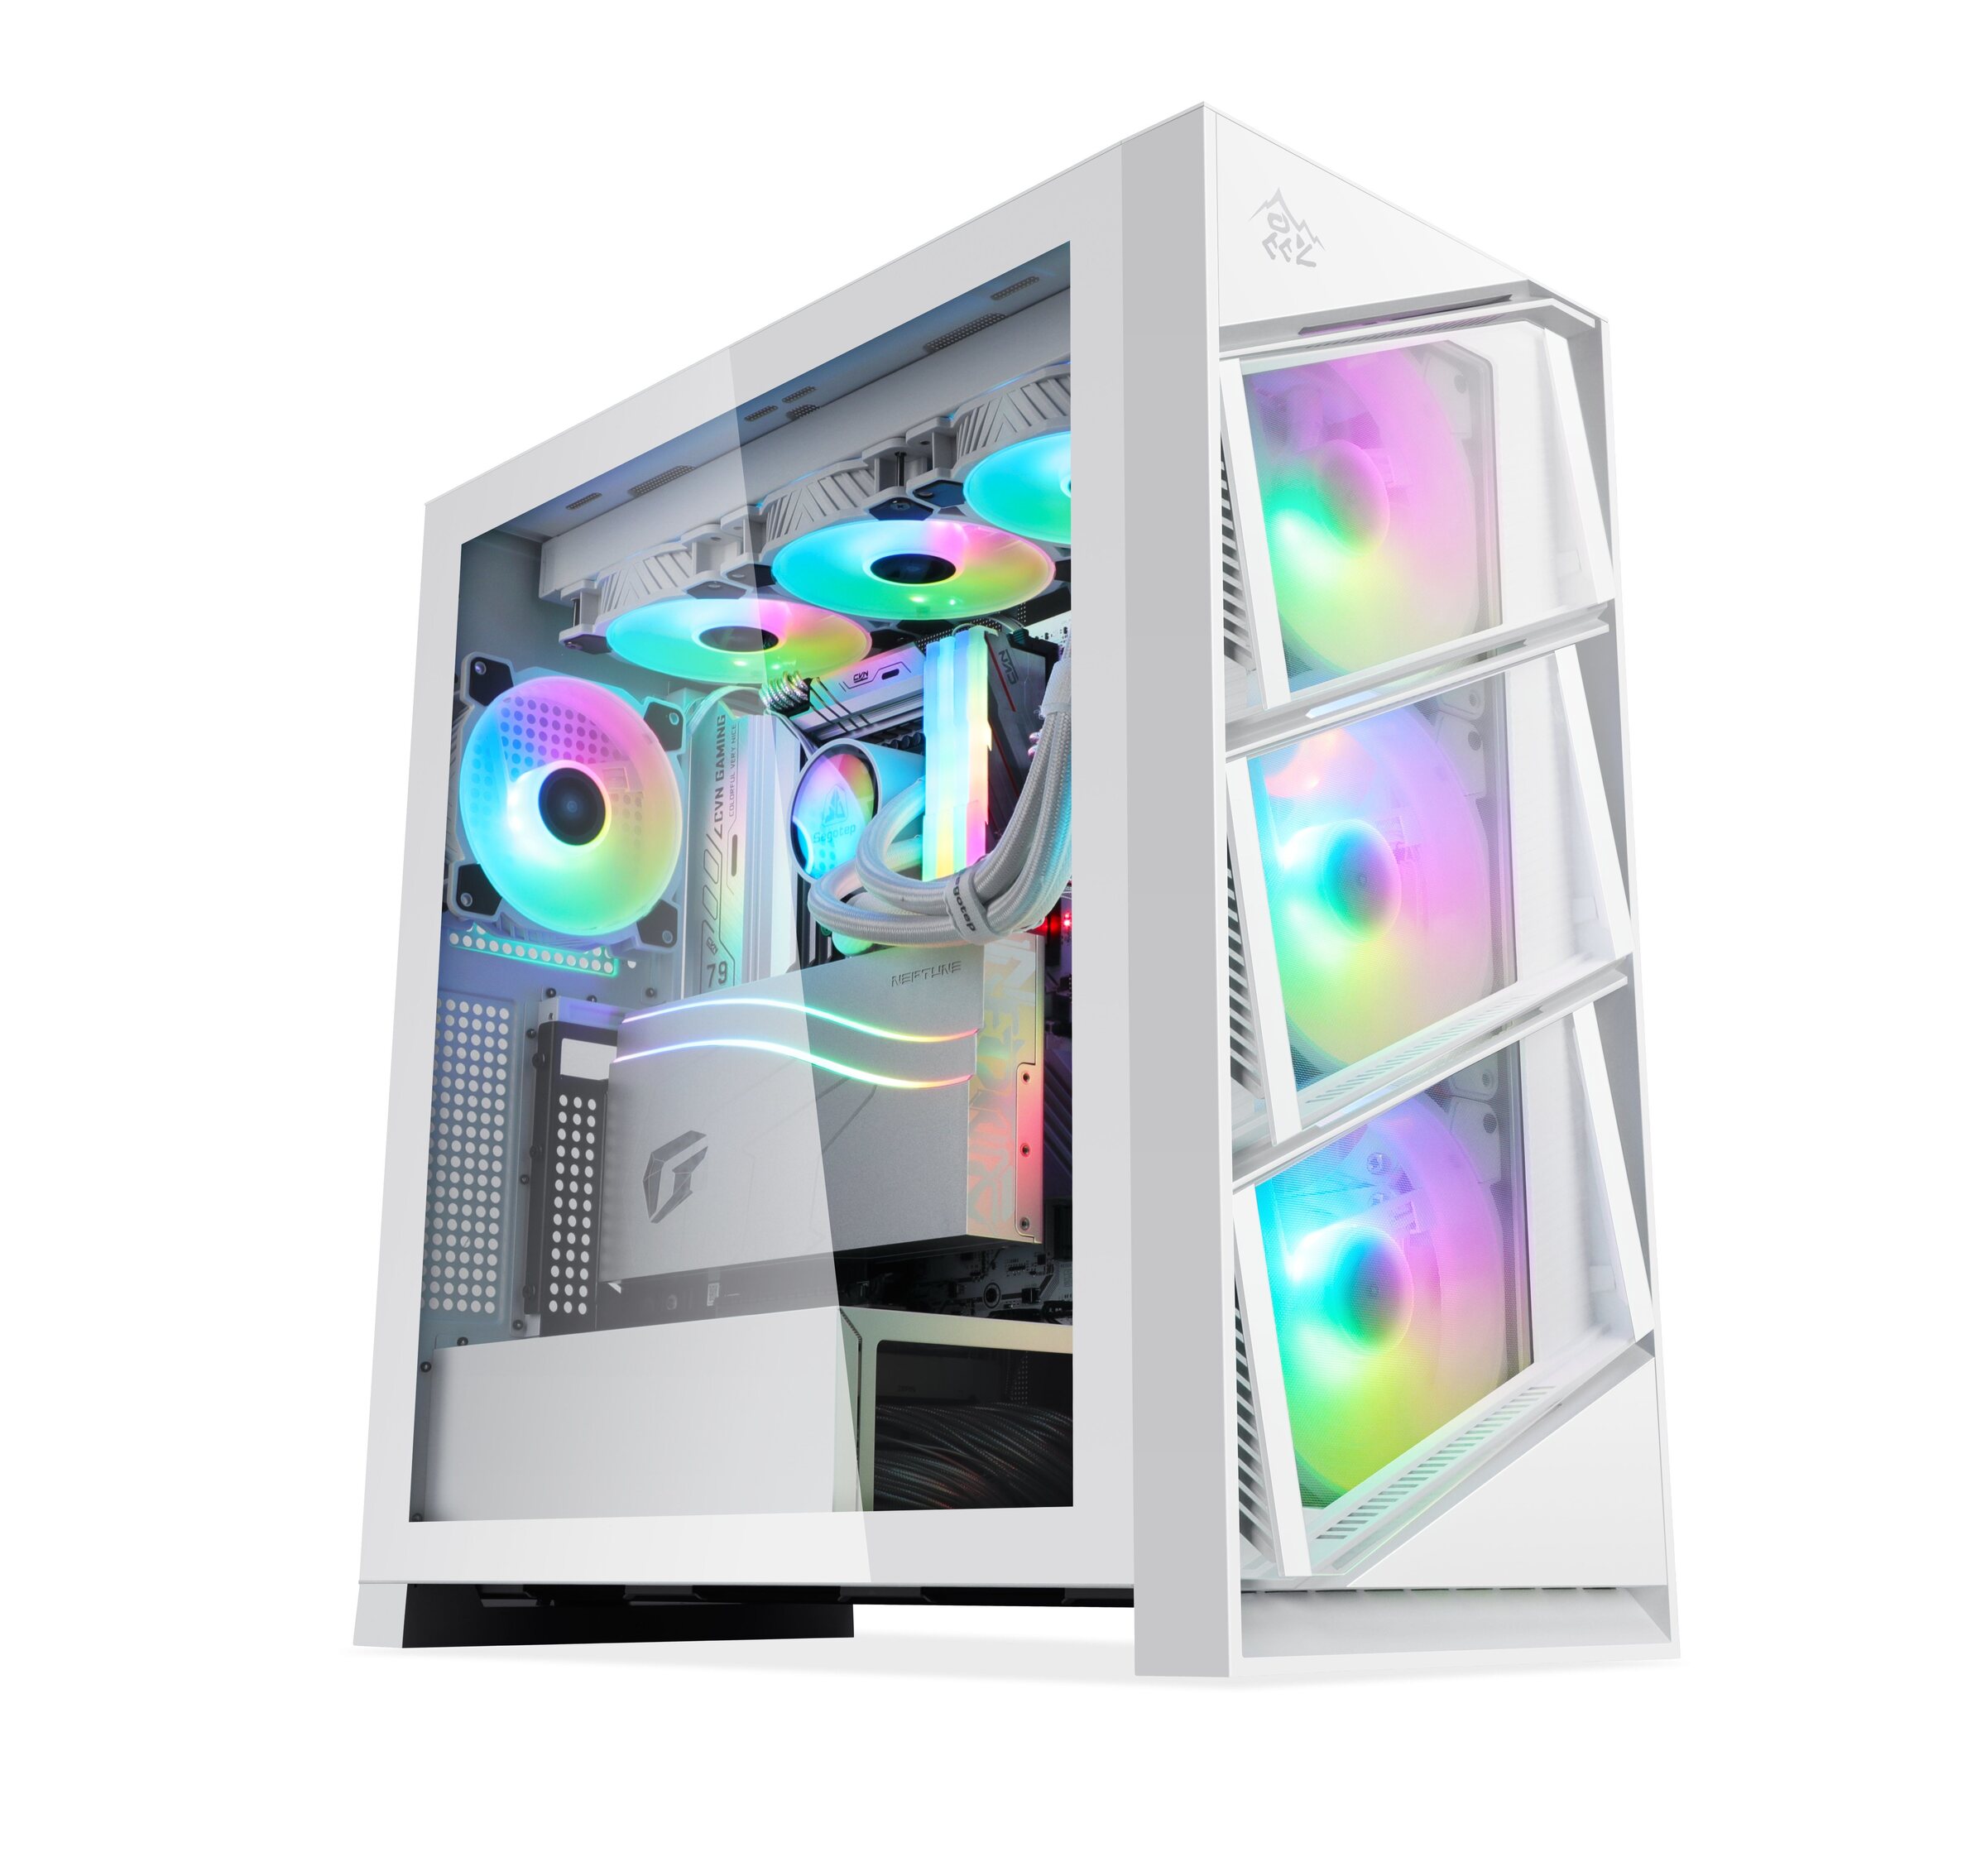 Segotep-Kl-Aeolus-ATX-Desktop-Gaming-PC-Case-Rtx4090-GPU-Supported-MID-Tower-Computer-Case